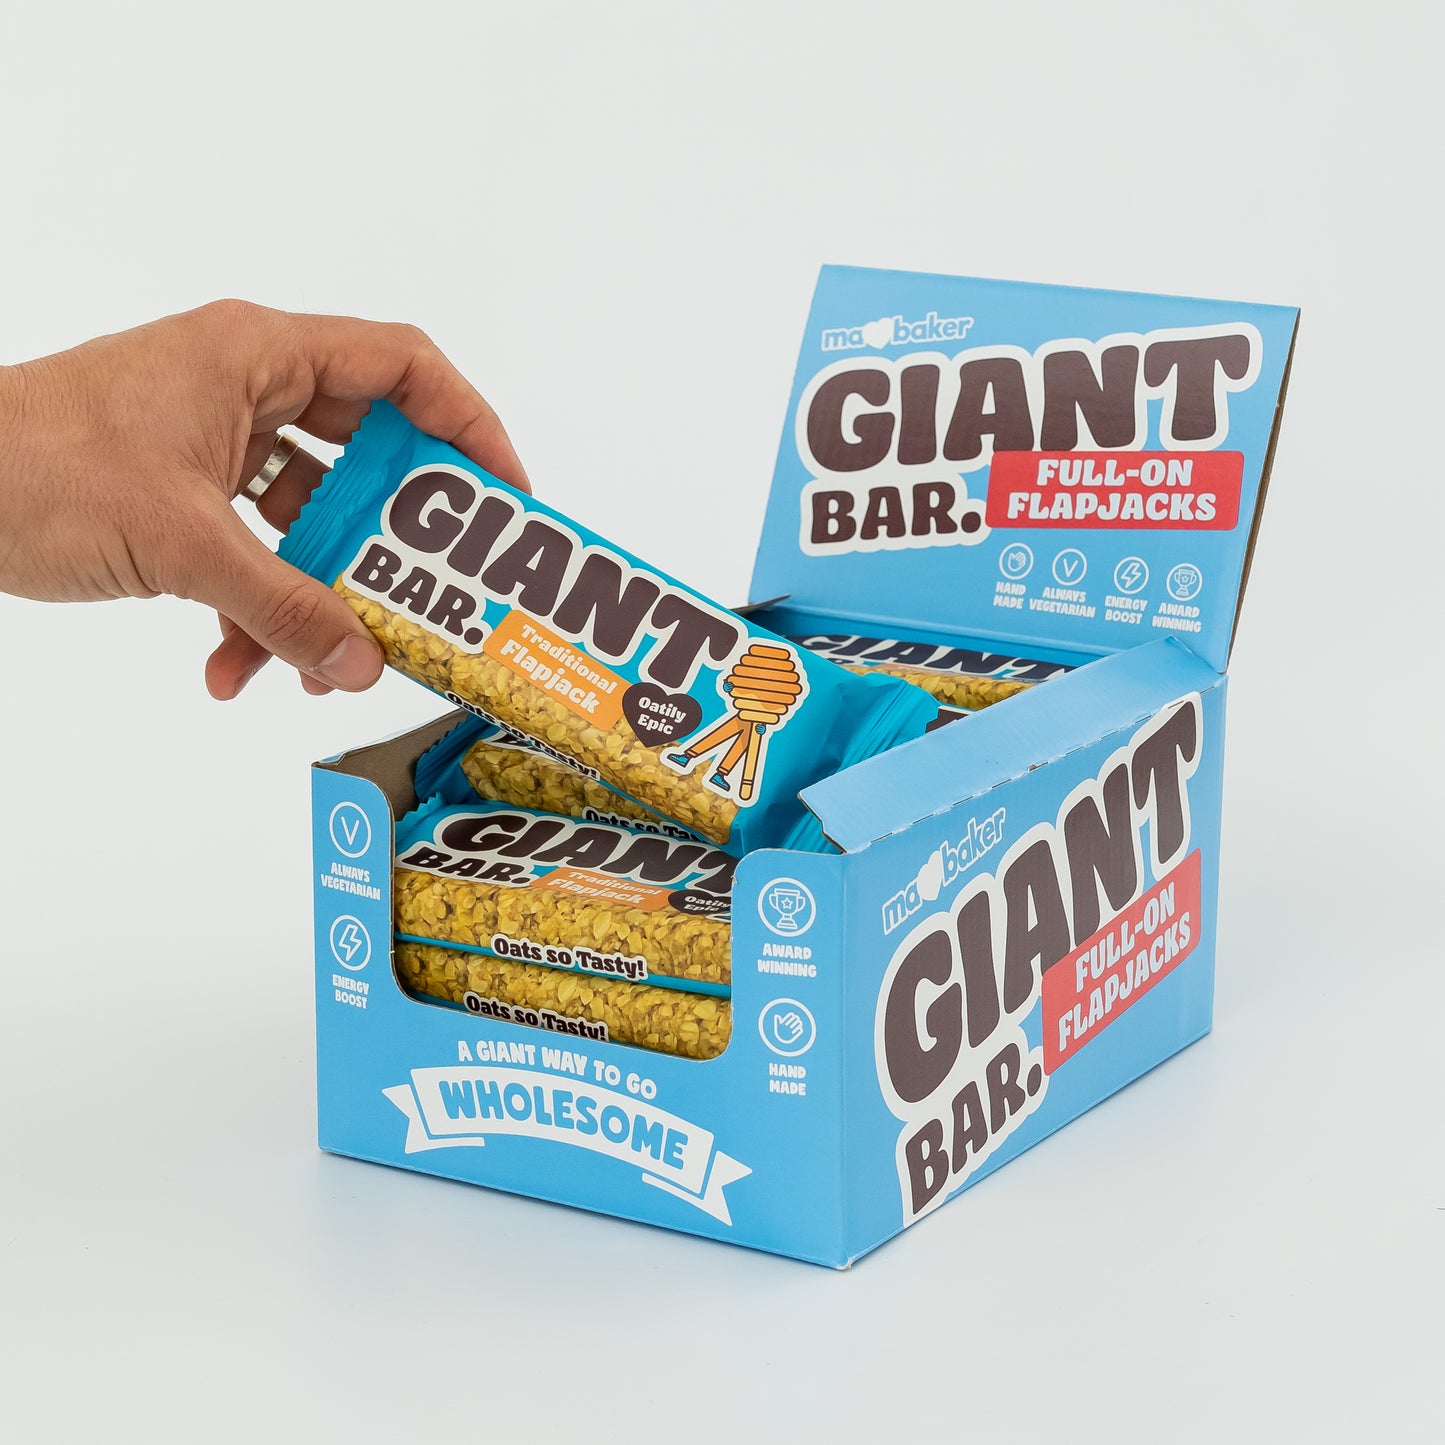 A hand taking a Traditional Giant Bar from a box of Giant Bars